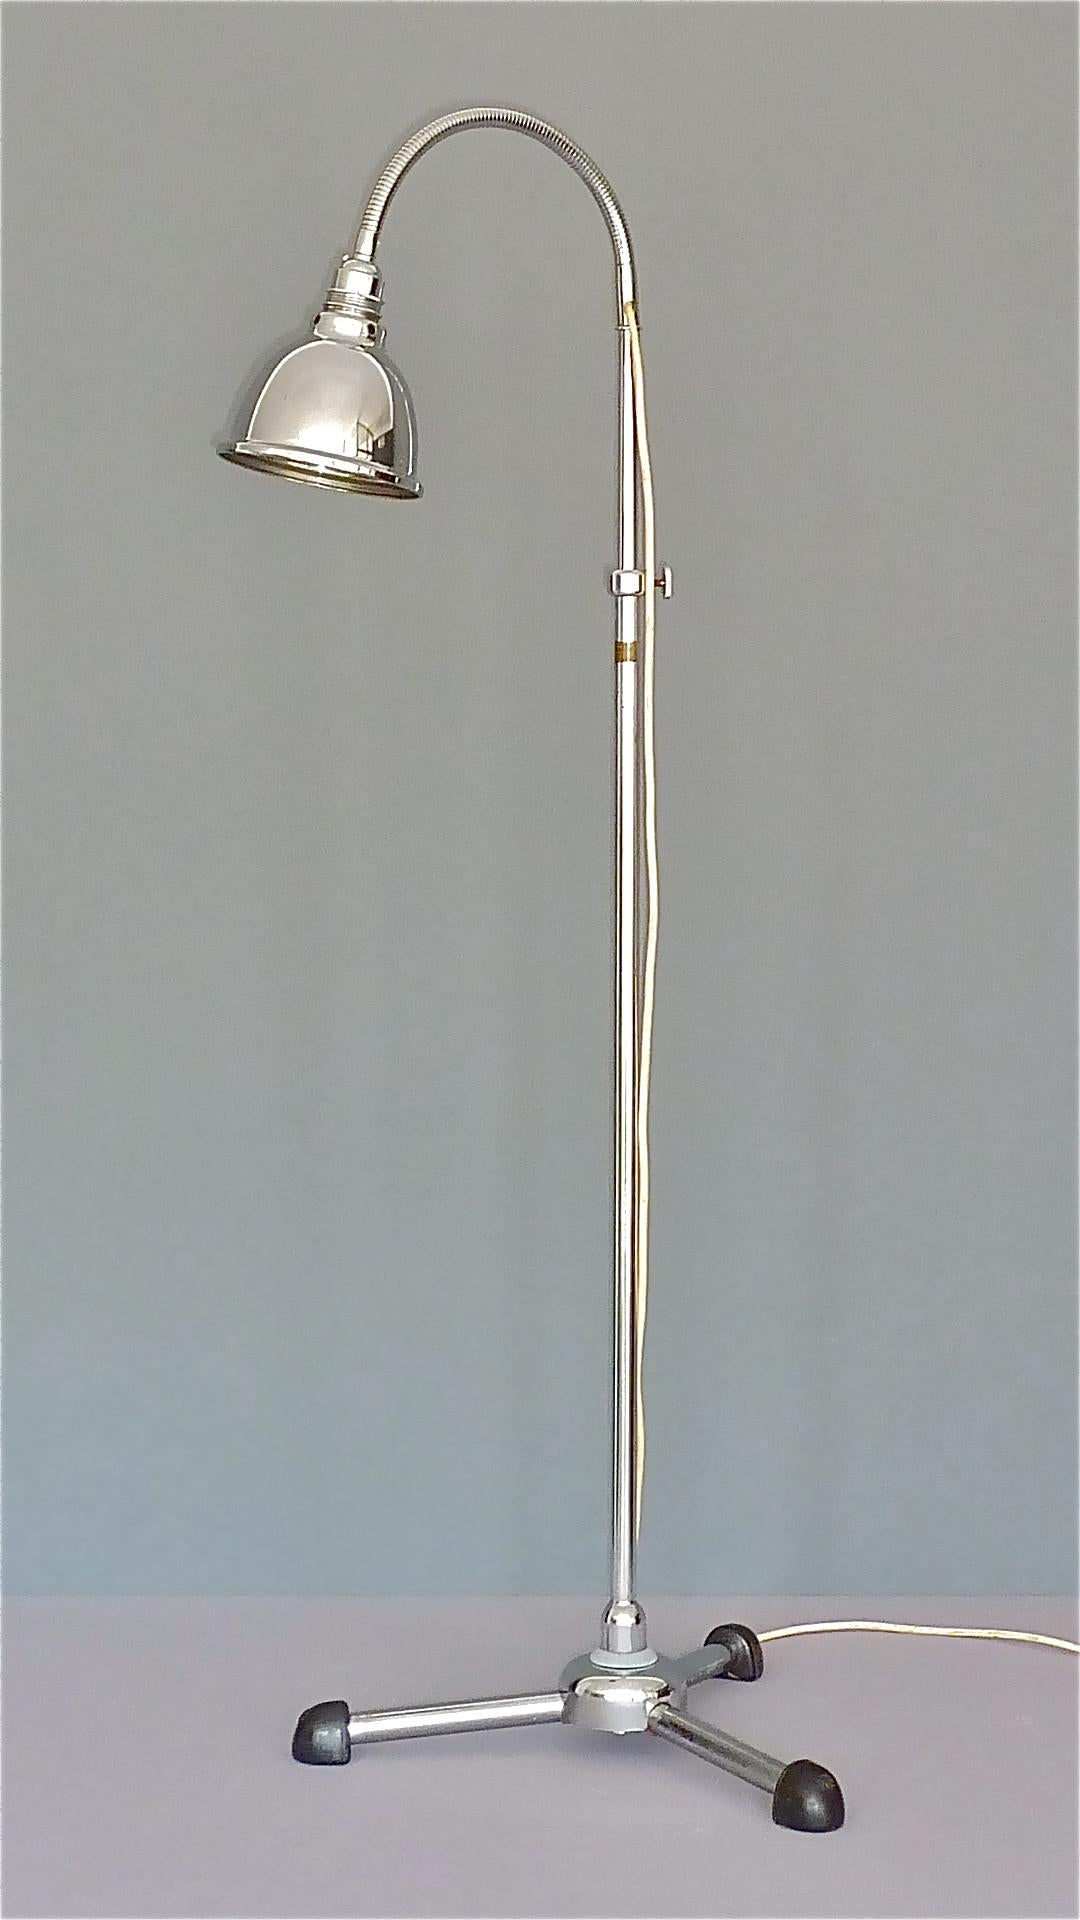 Rare Bauhaus flexible gooseneck standard floor lamp with tripod base designed by Christian Dell attribution and executed by Maquet, Germany around 1930s. Originally launched as medical lamp with infra-red lamp bulb it can be used as adjustable